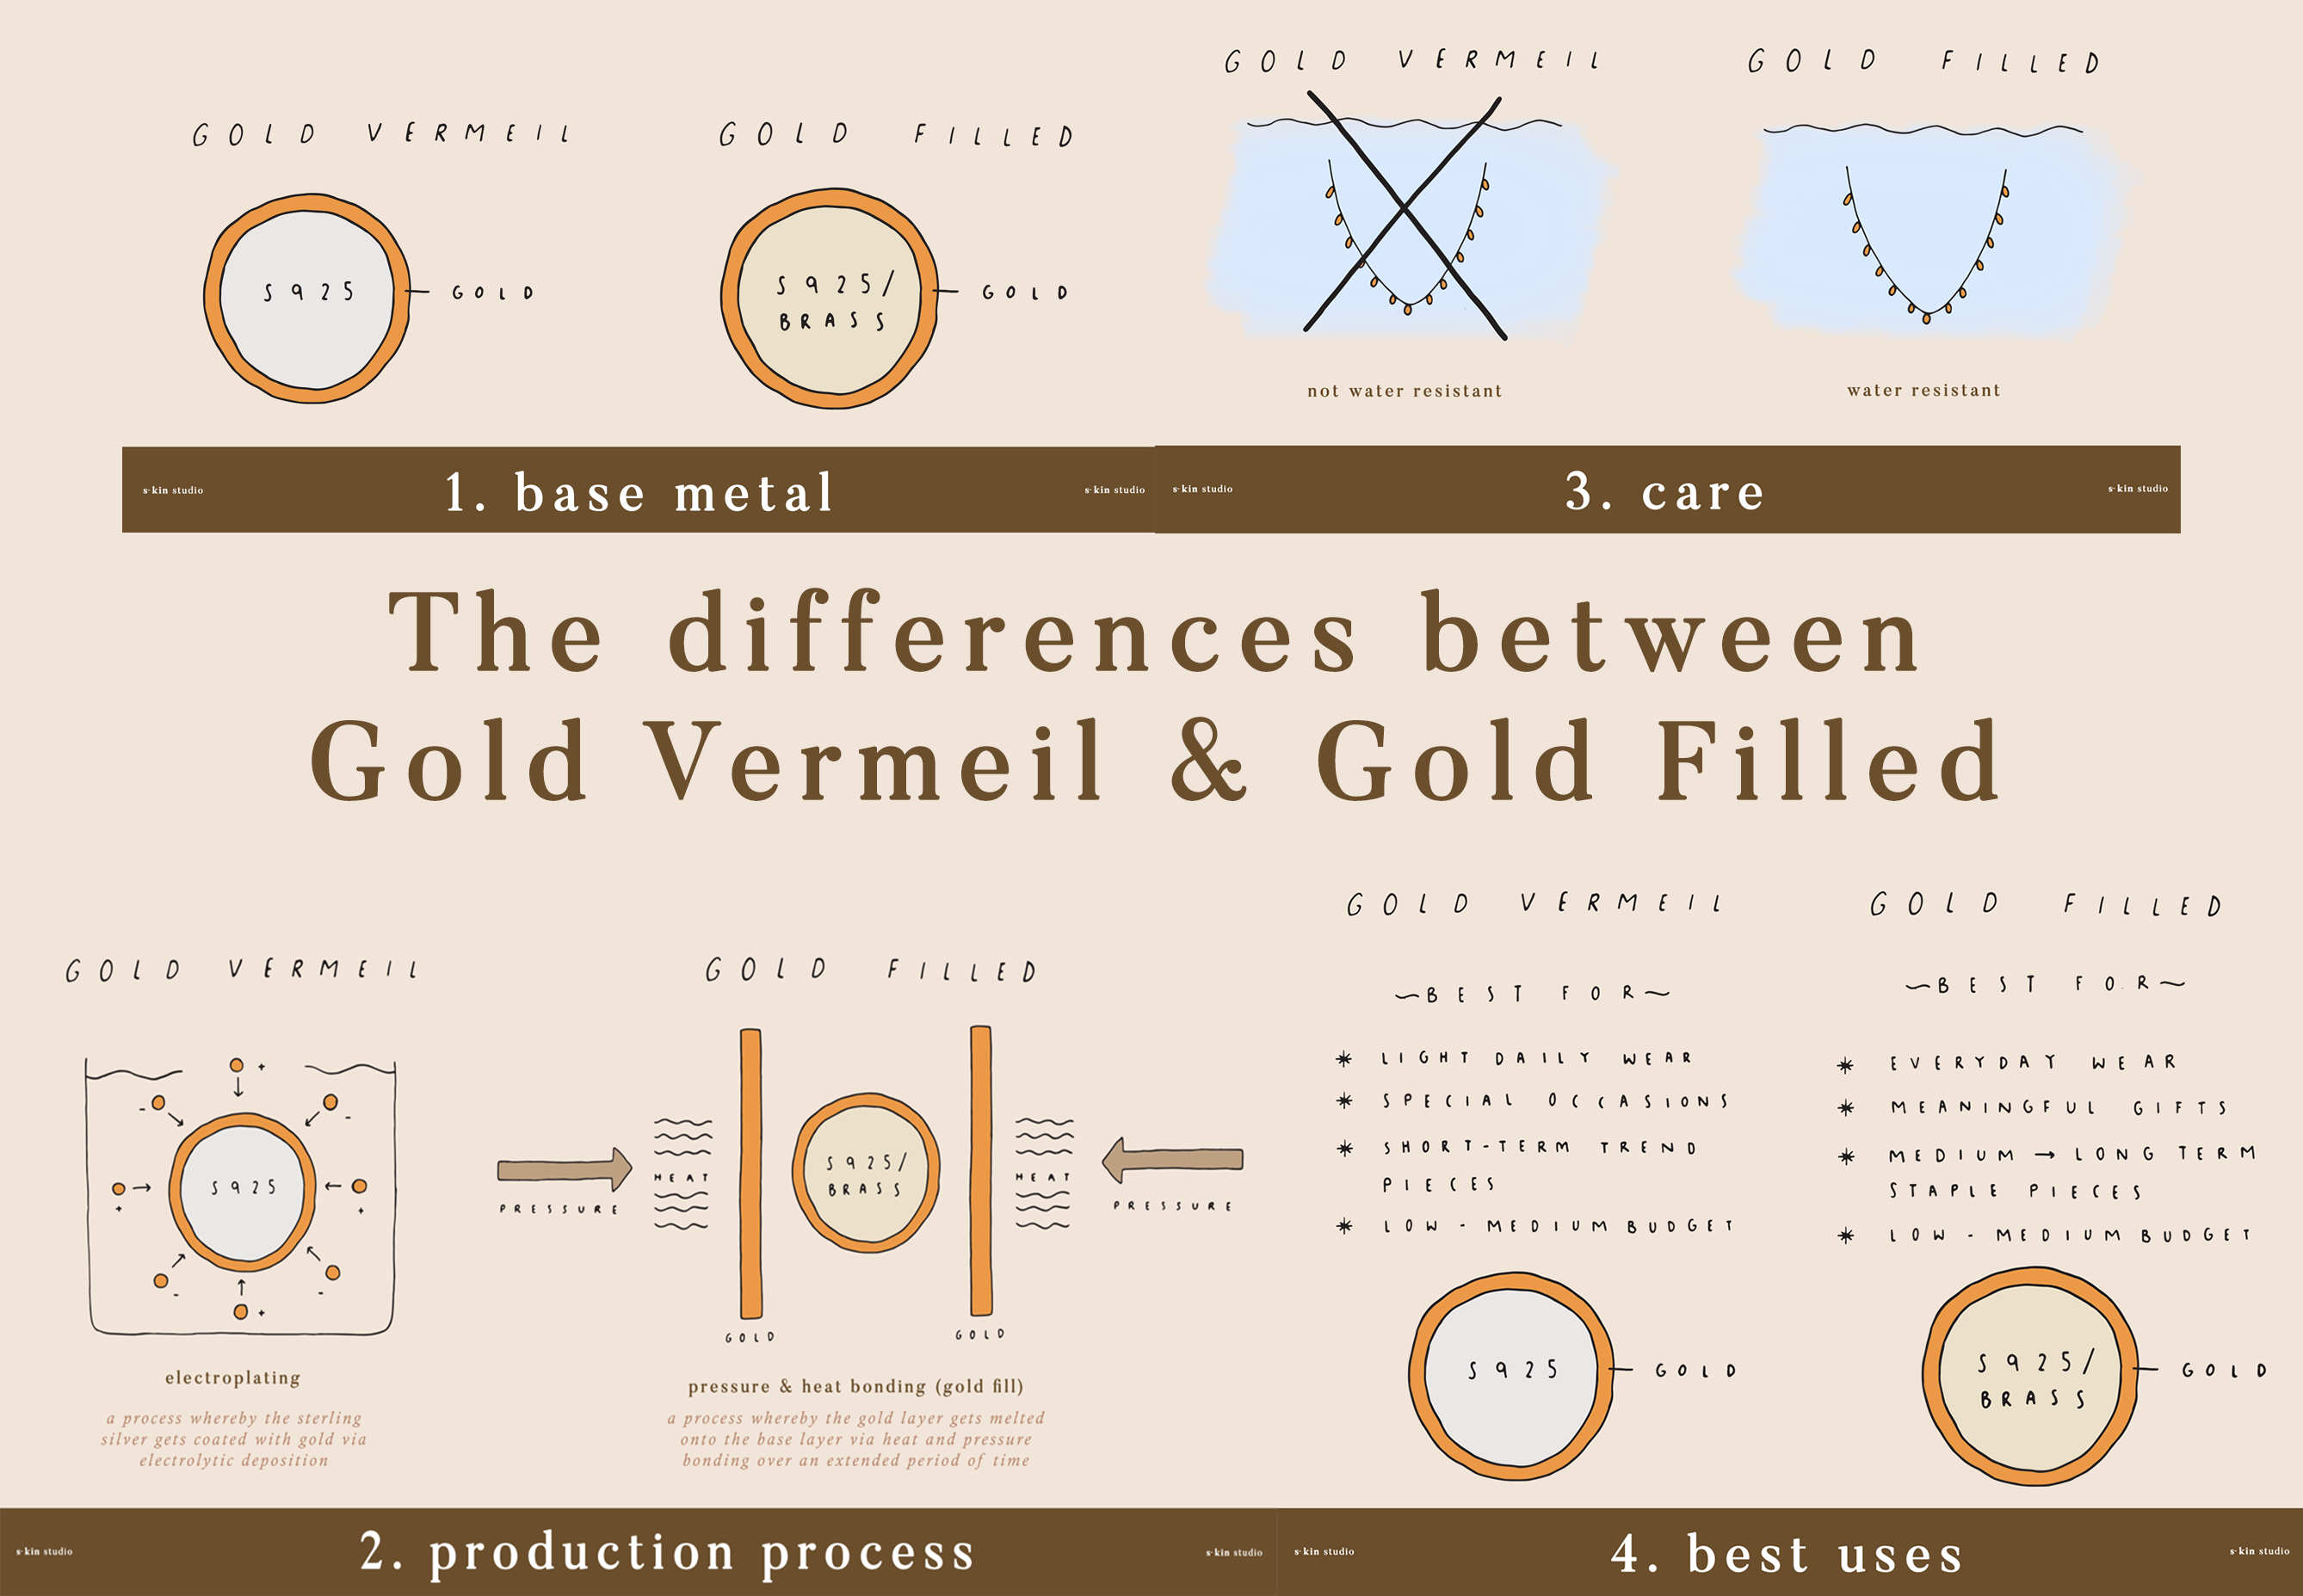 Gold Vermeil vs. Gold Filled | The Differences